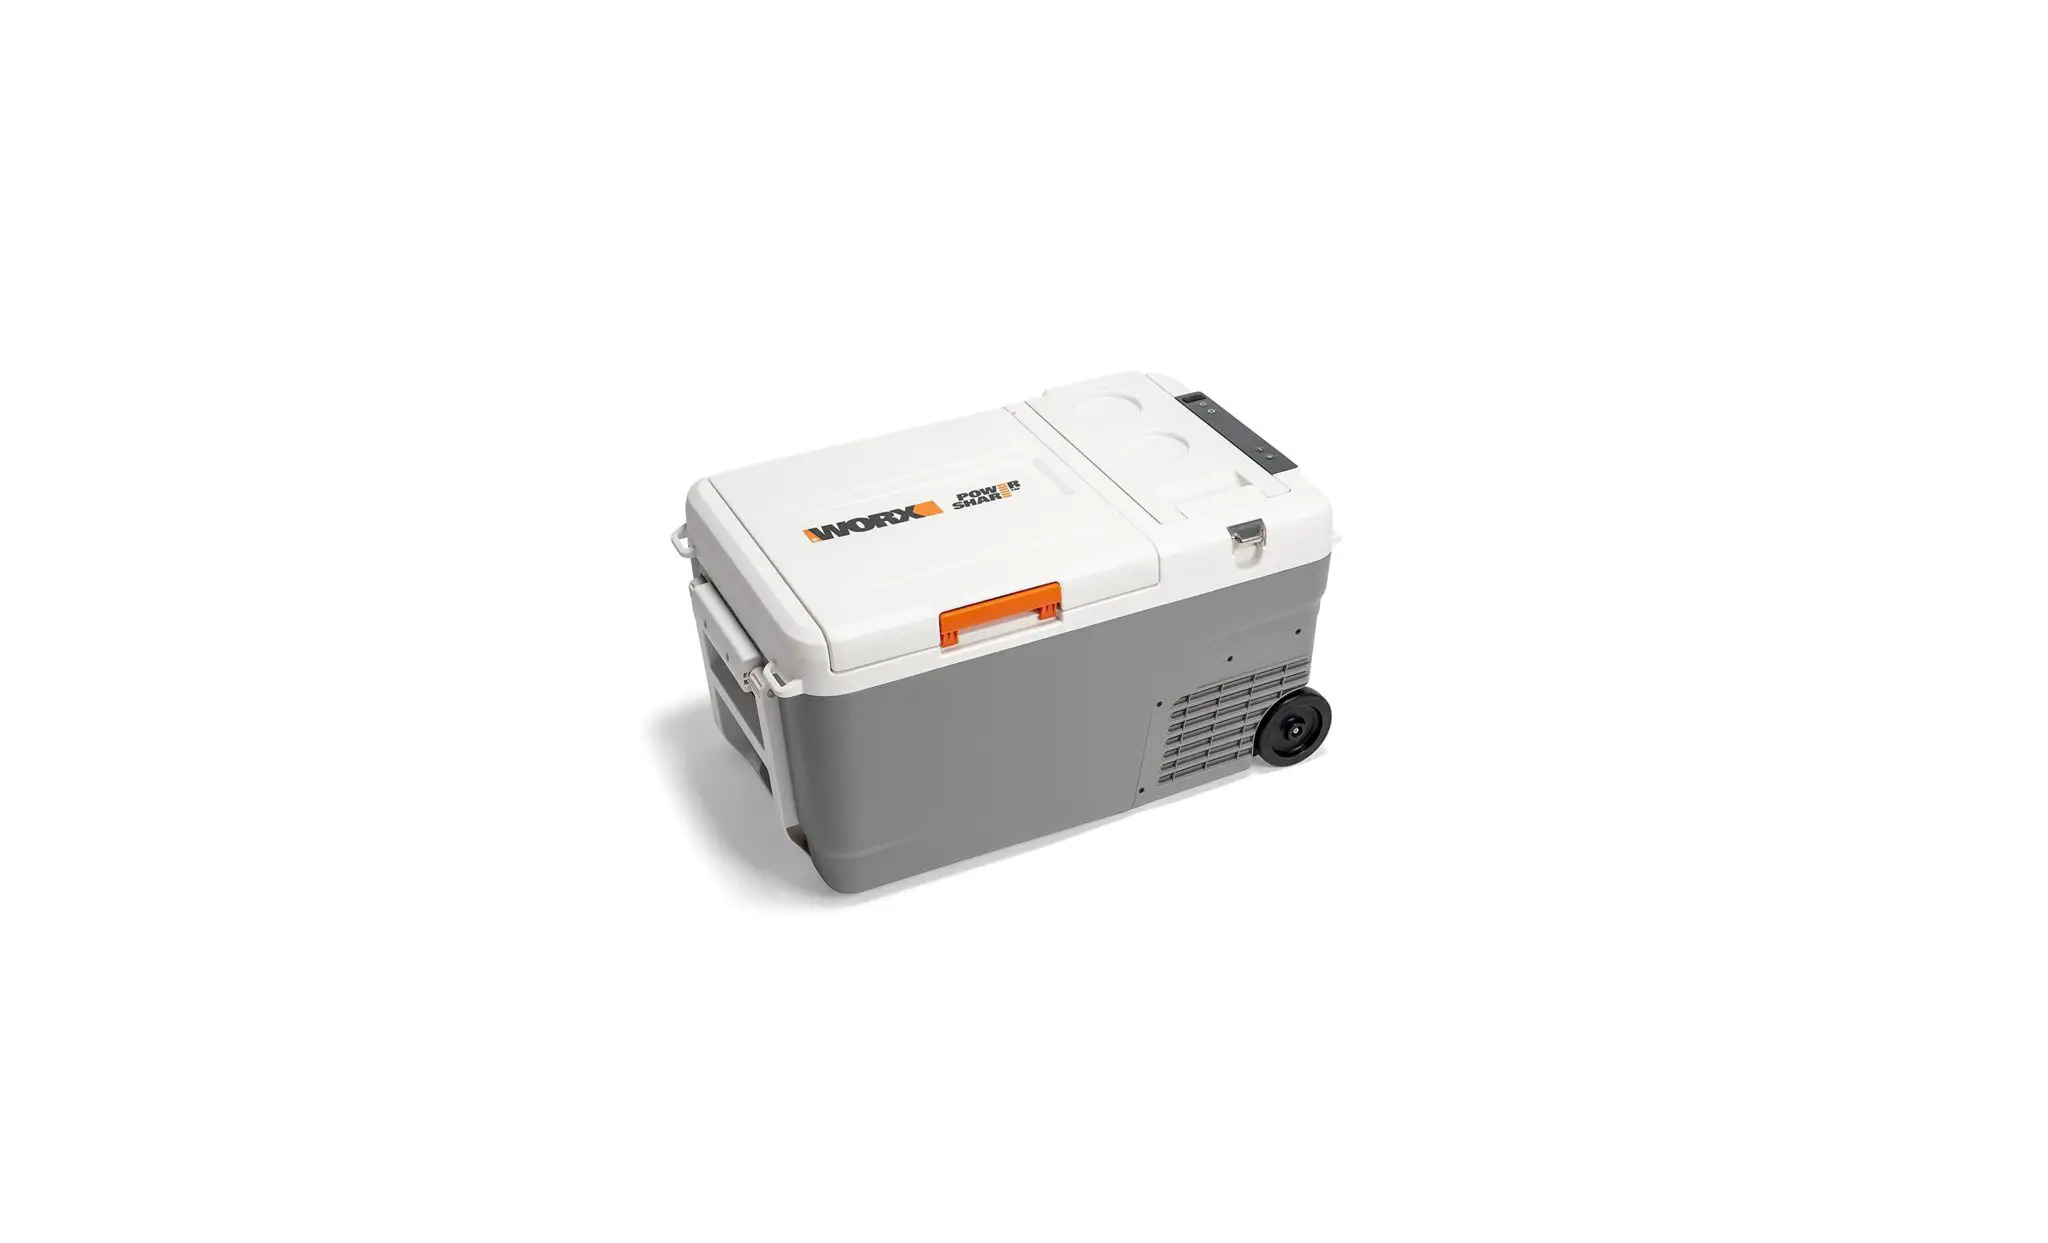 WX876, WX876.X 20V Portable Electric Cooler